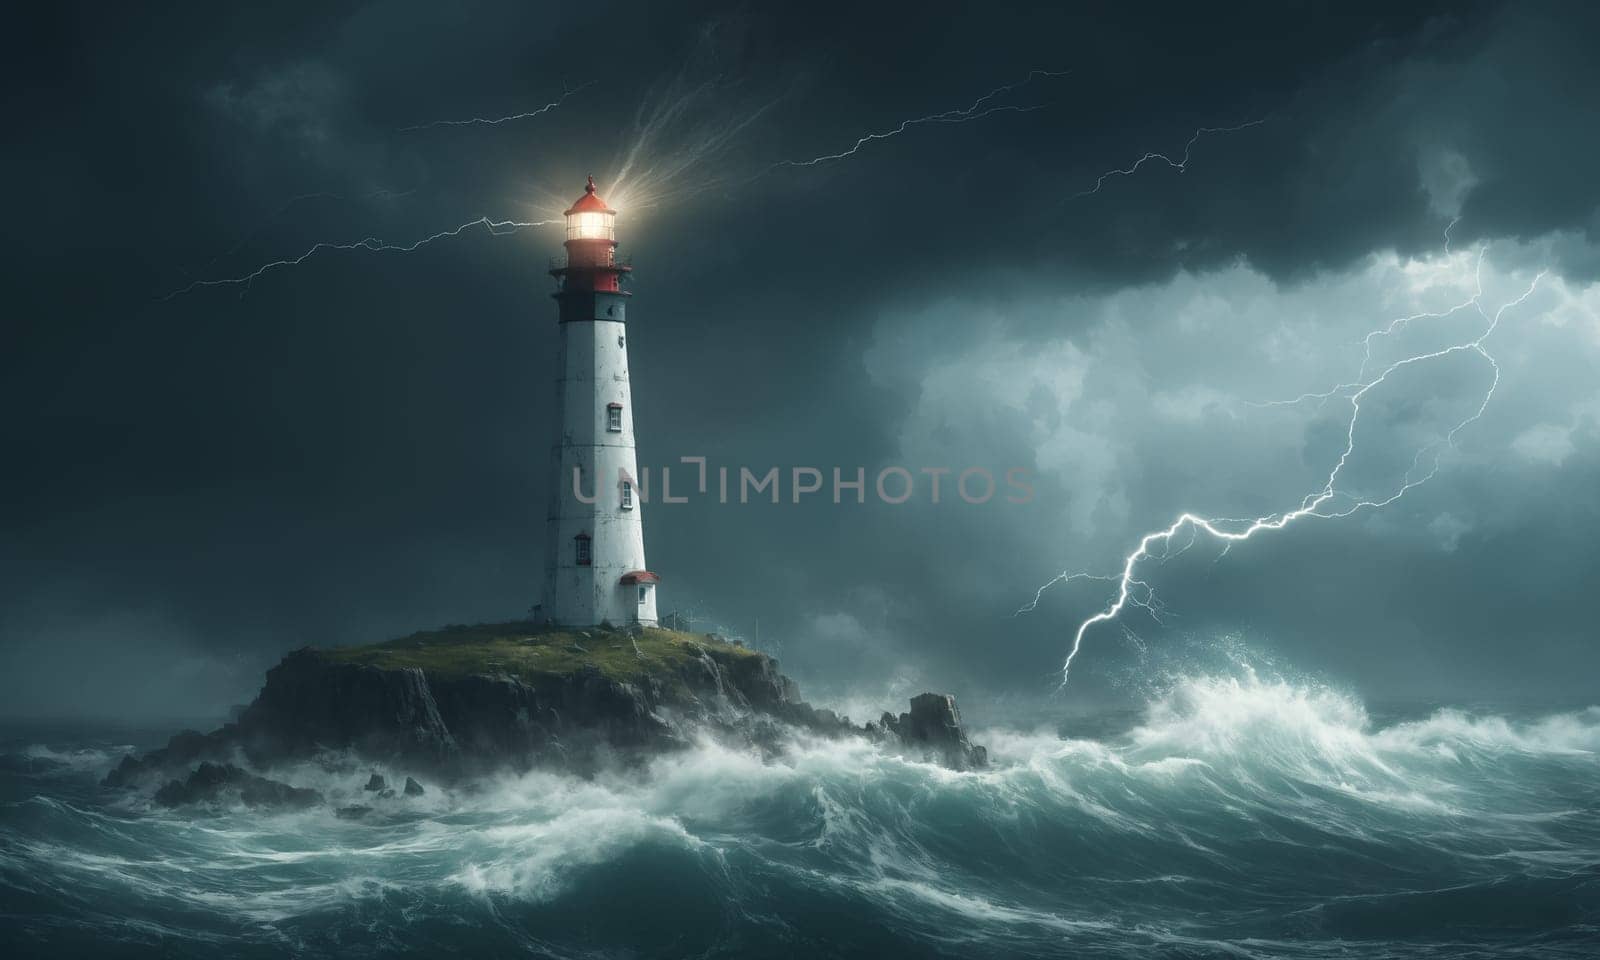 Lighthouse on small island in stormy ocean with dark sky and rough water by Andre1ns